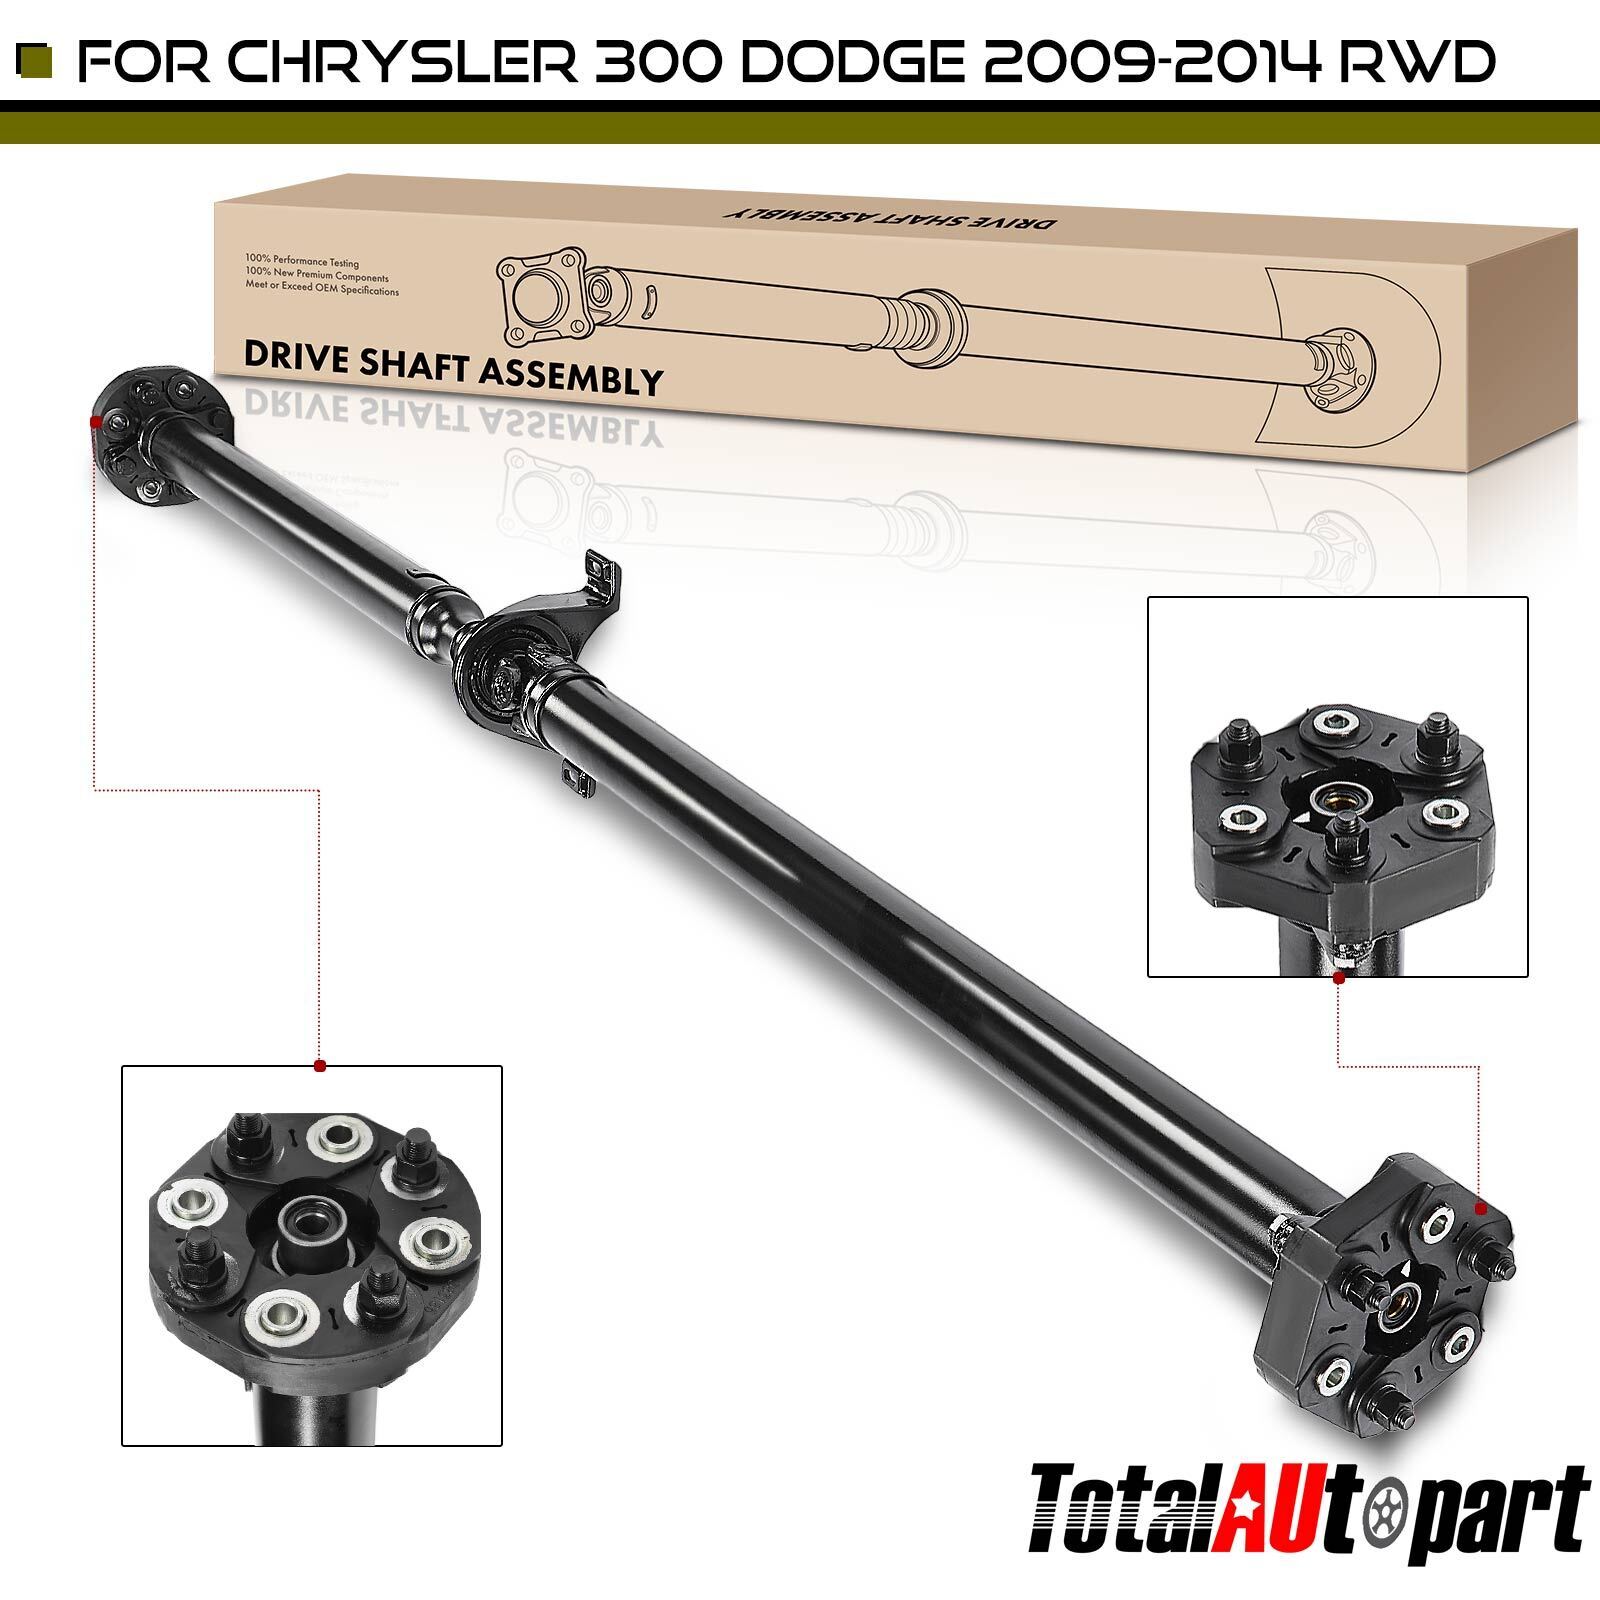 Auto Drive Shaft Assembly for Dodge Charger Chrysler 300 2009-2014 RWD Rear Side